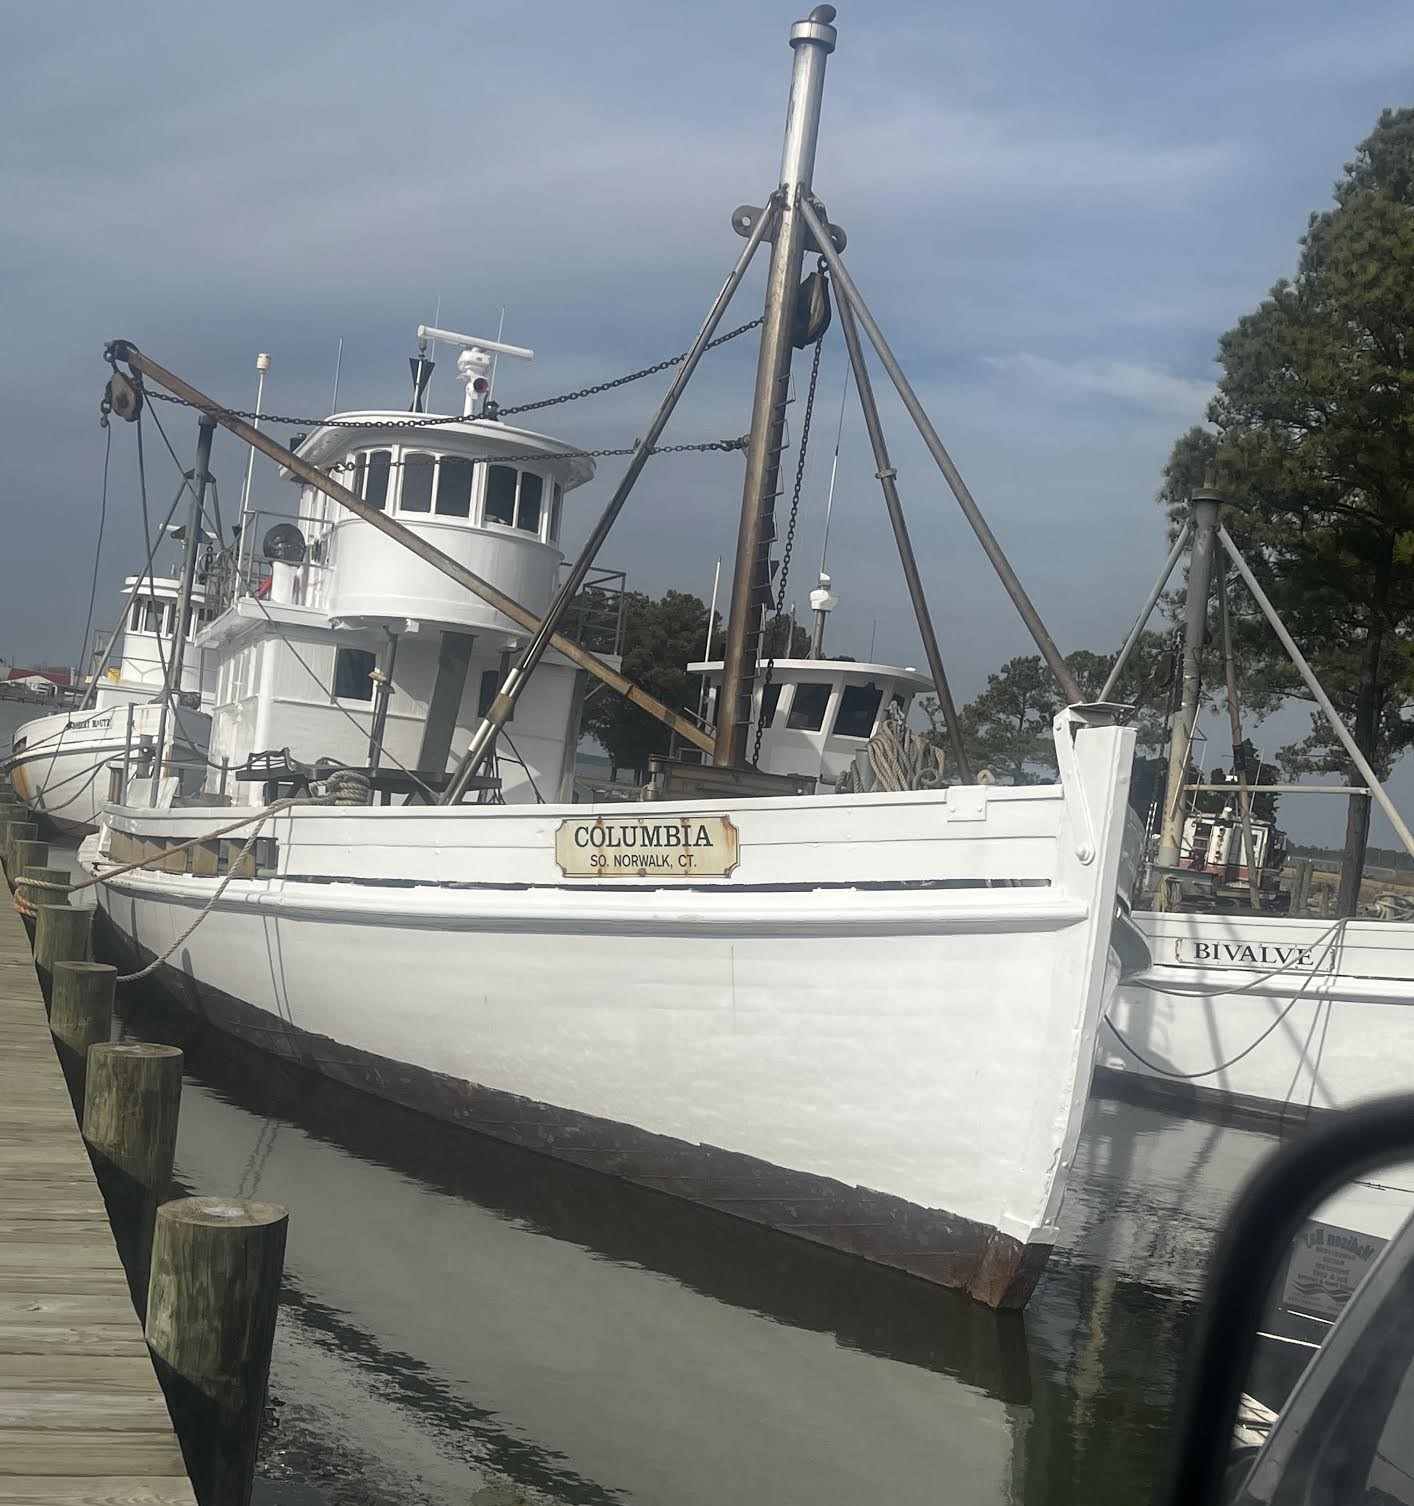 4 Old Buyboats Start New Lives in Md. Waters